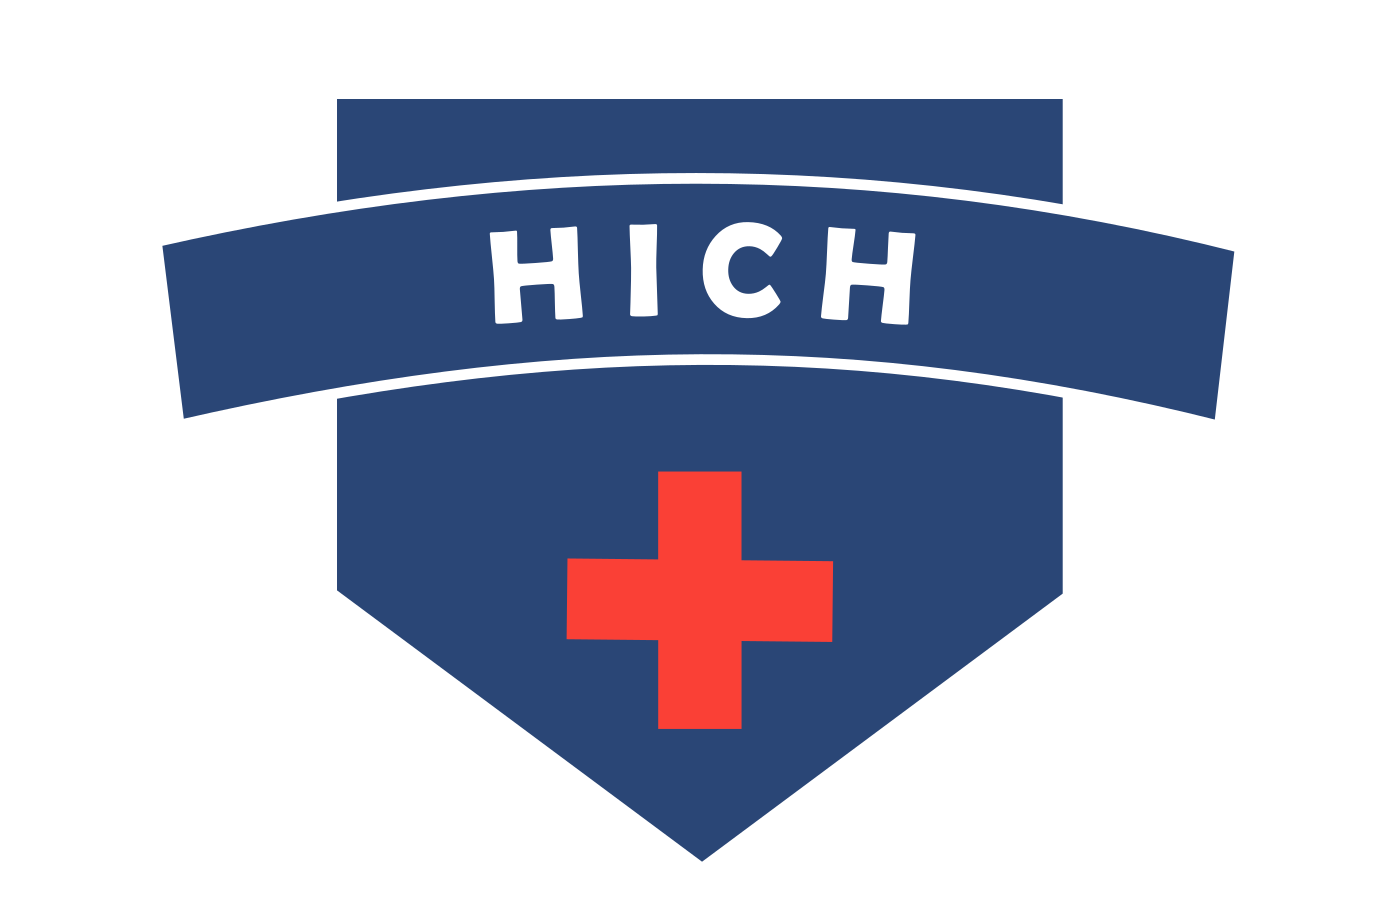 hich.logo-2.png